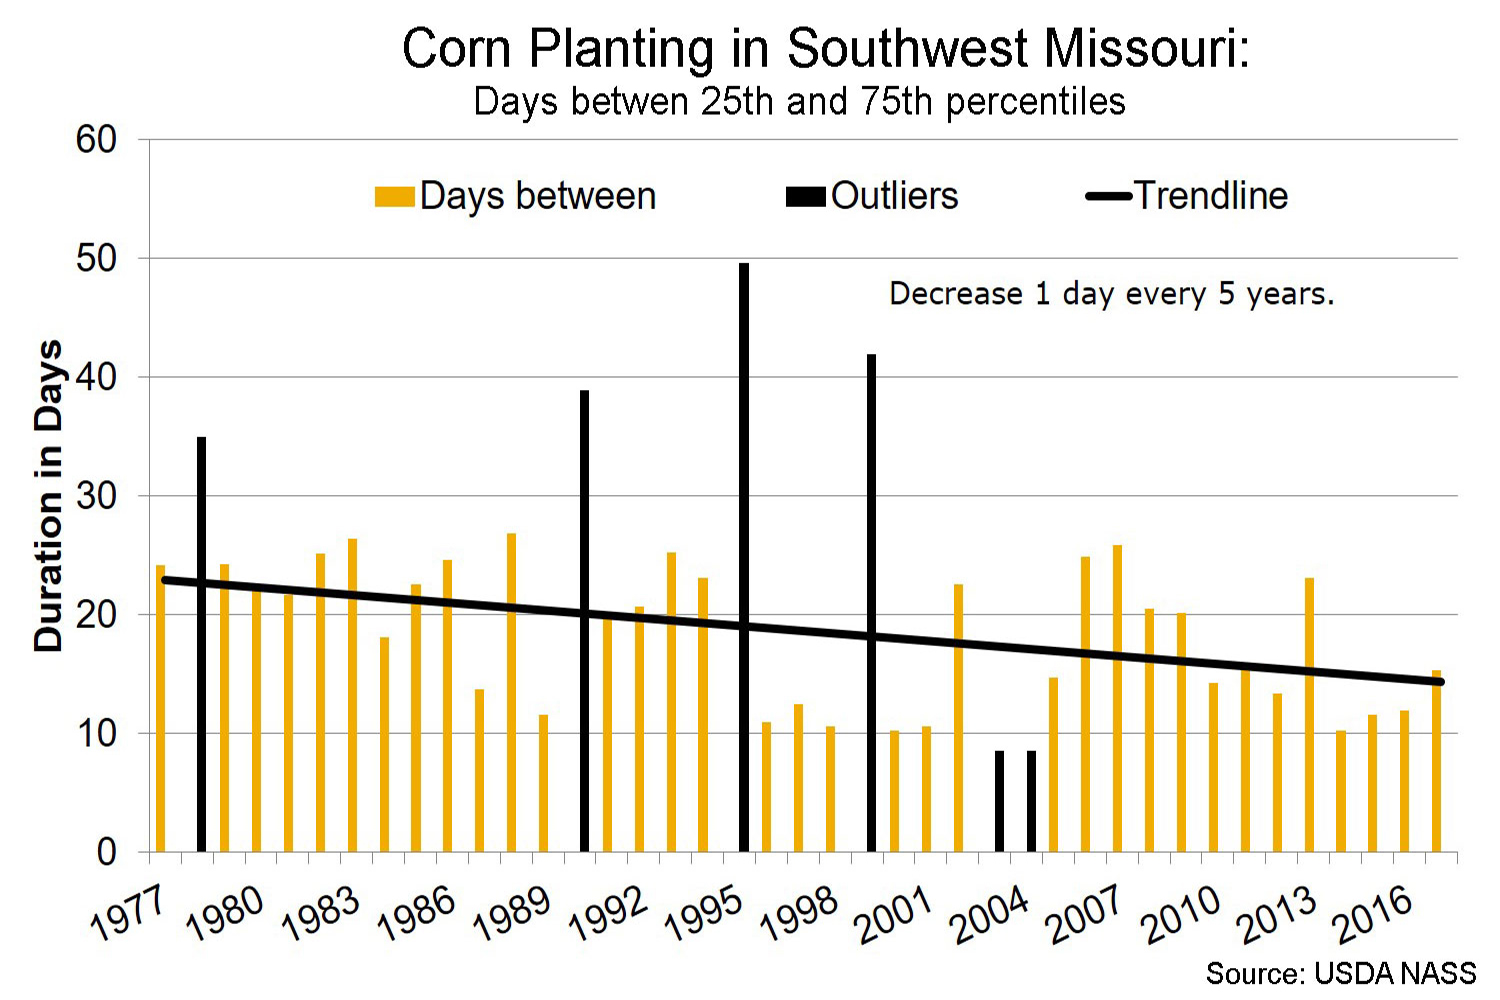 Corn planting in southwest Missouri days between 25th and 75th percentiles chart